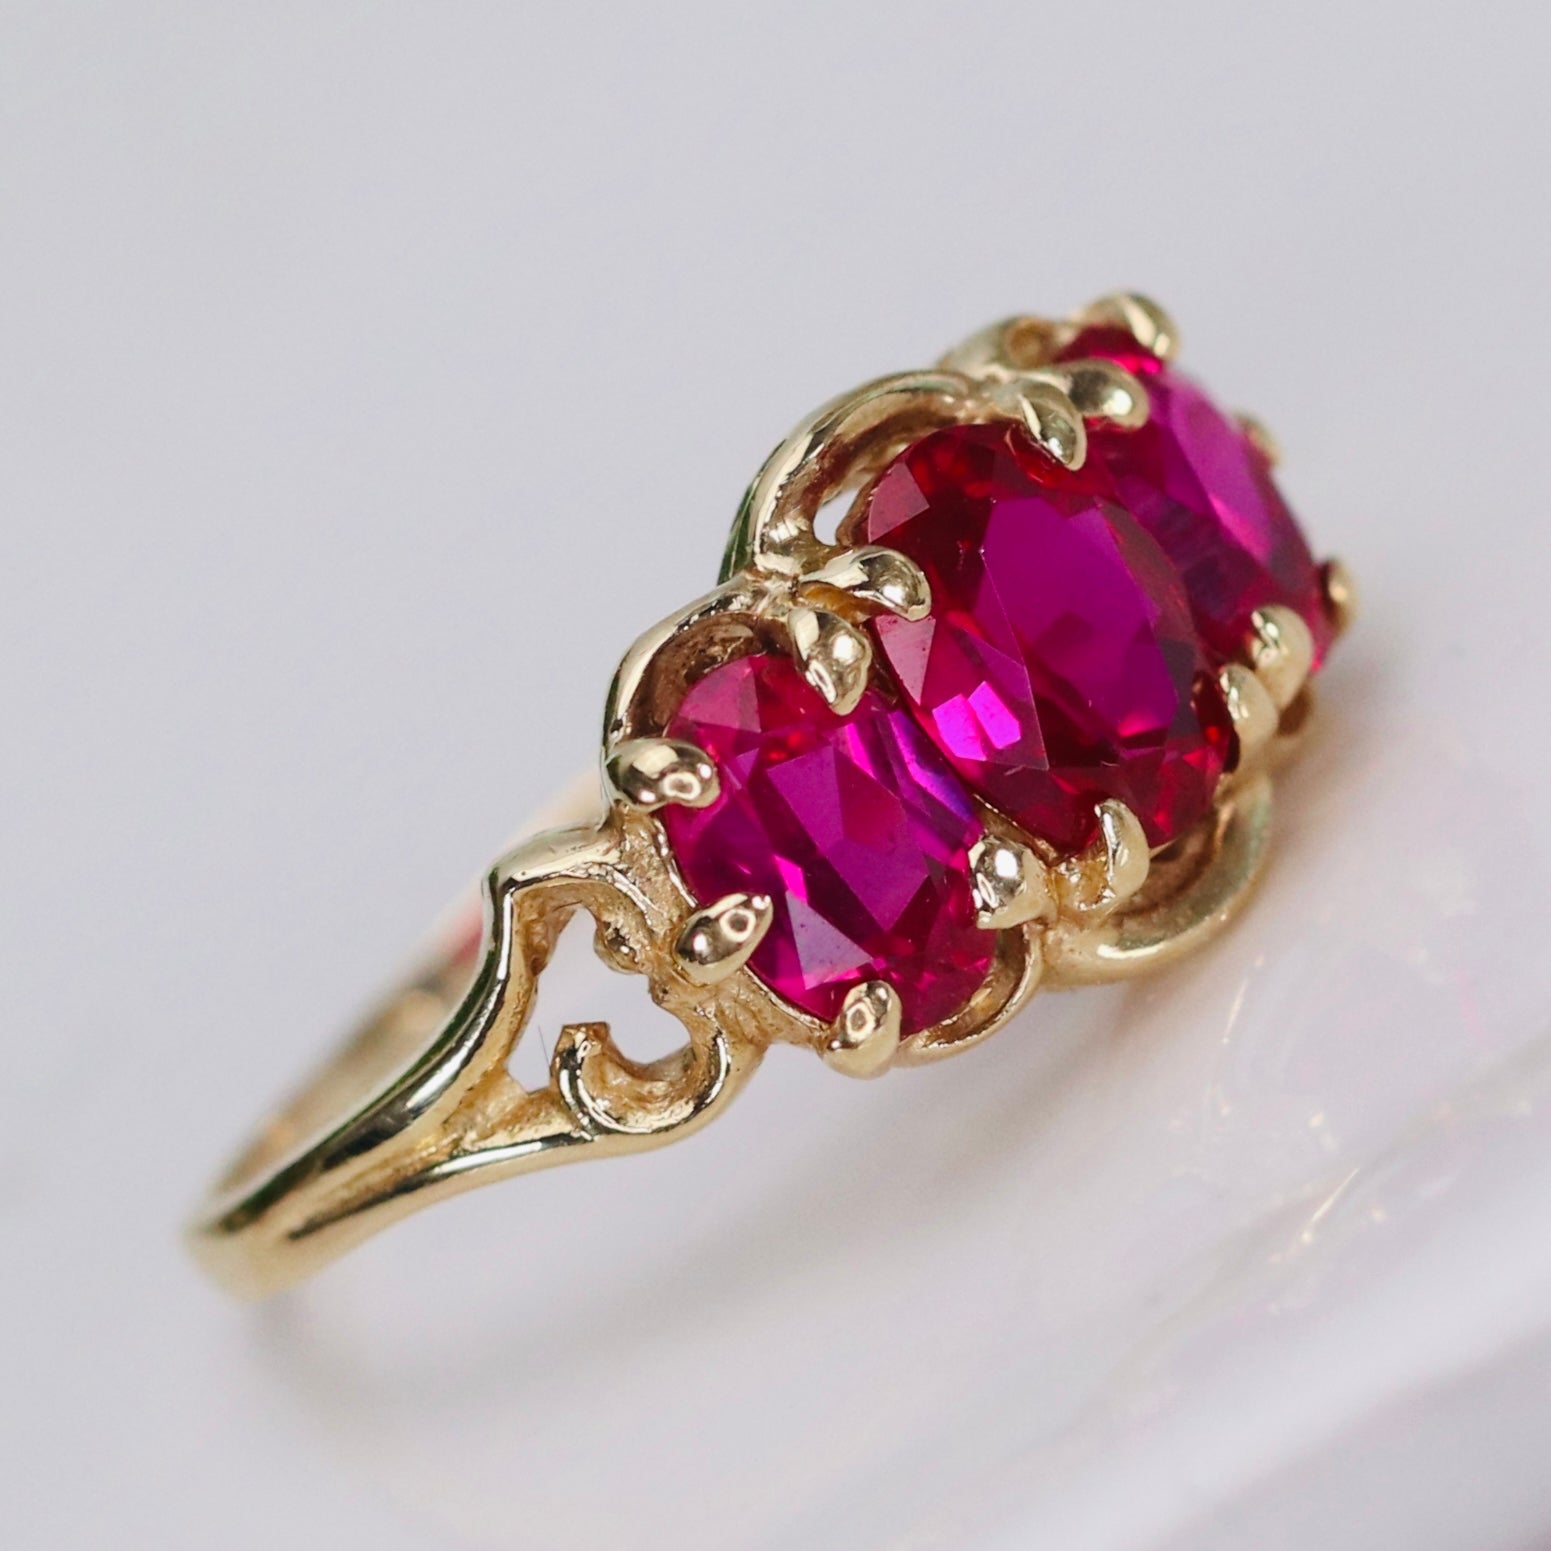 SYNTHETIC PINK SAPPHIRE AND DIAMOND RING